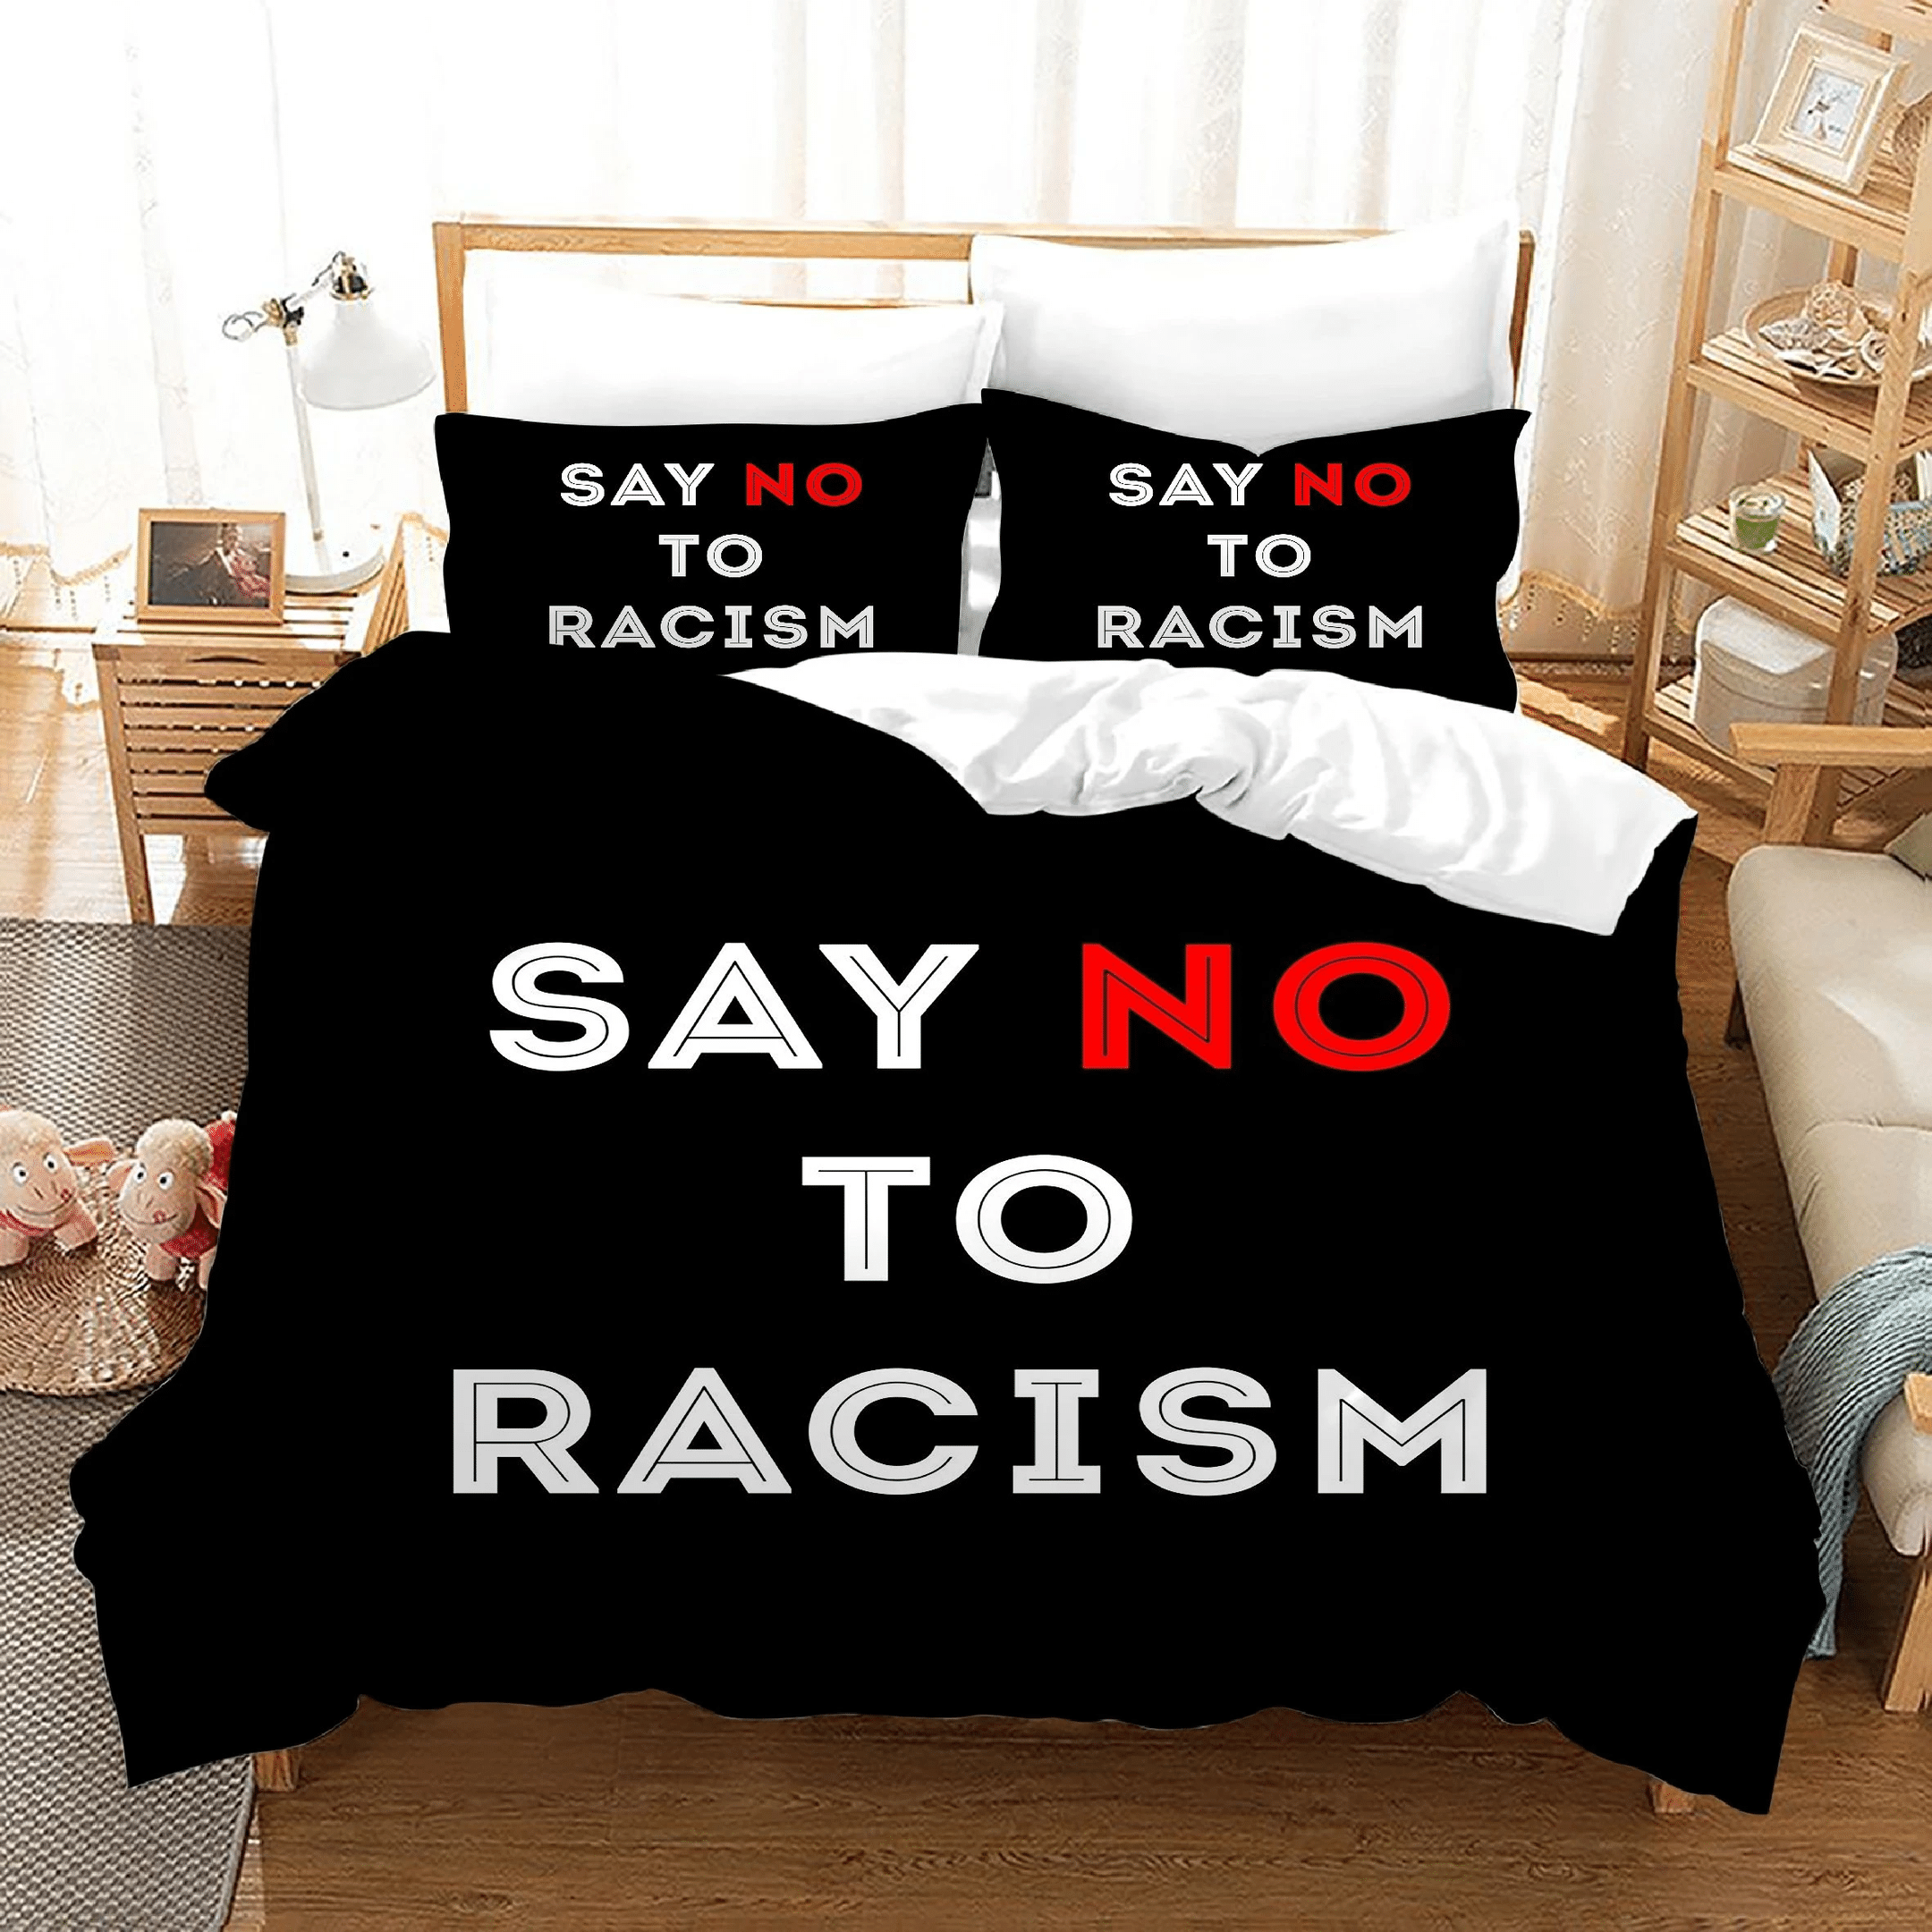 No To Racism 24 Duvet Cover Quilt Cover Pillowcase Bedding